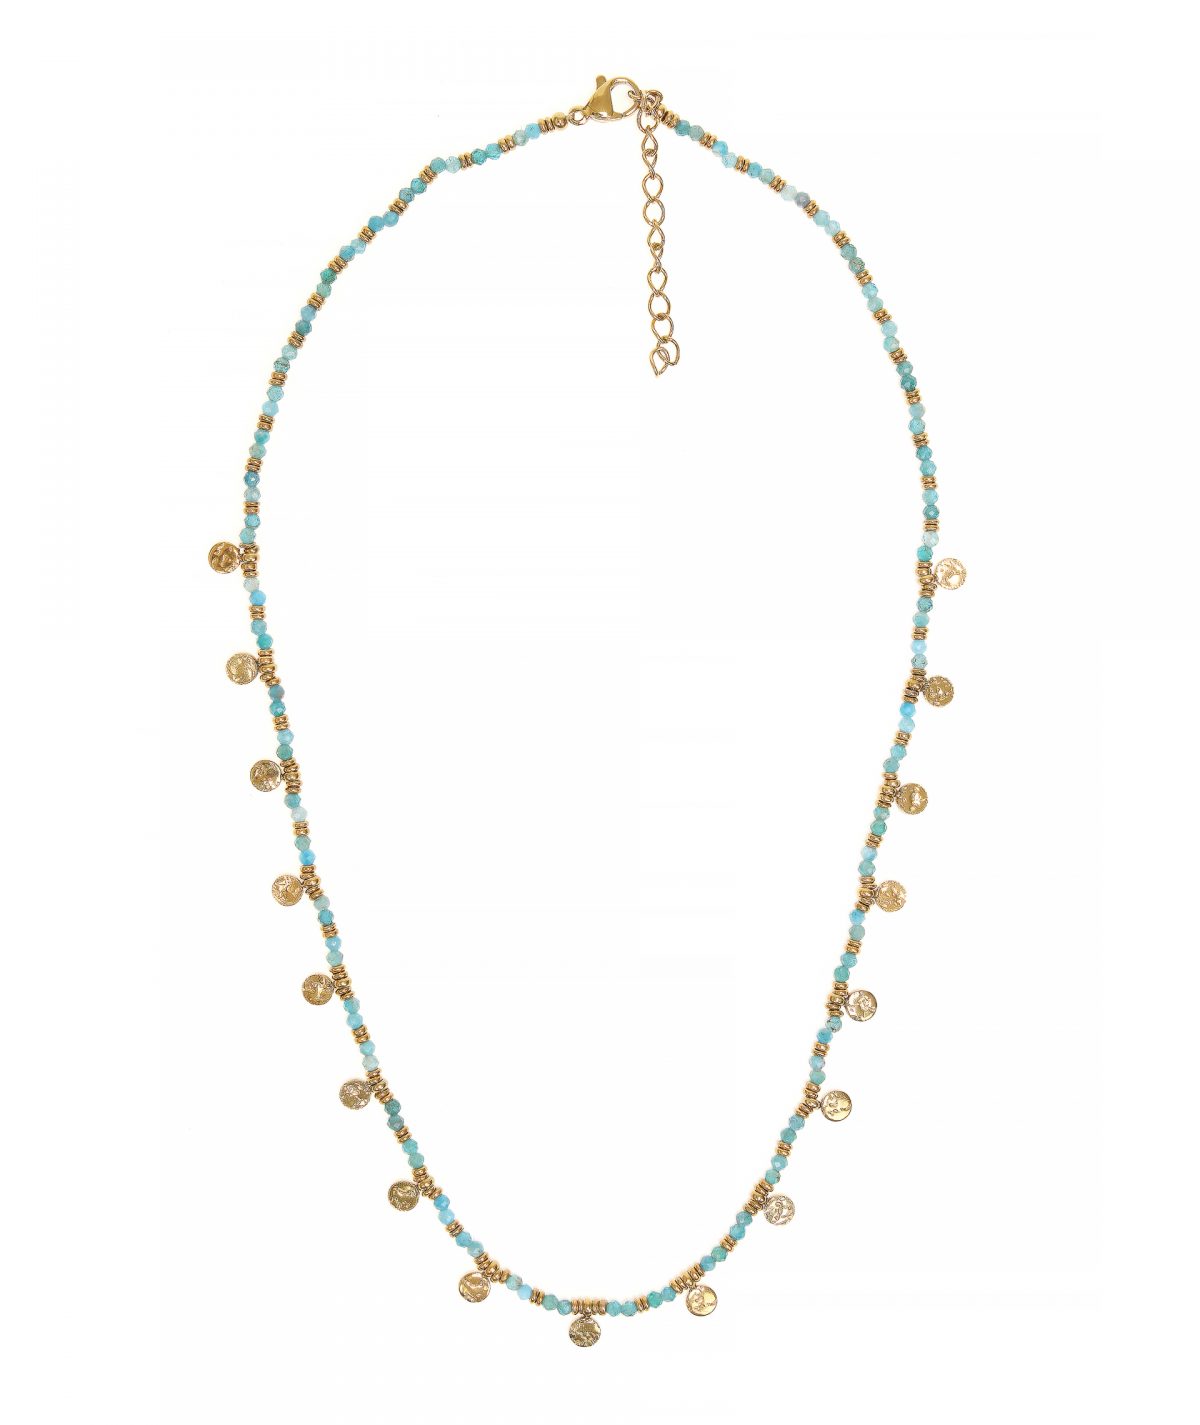 Amazonite Necklace with Gold Coins by TFD